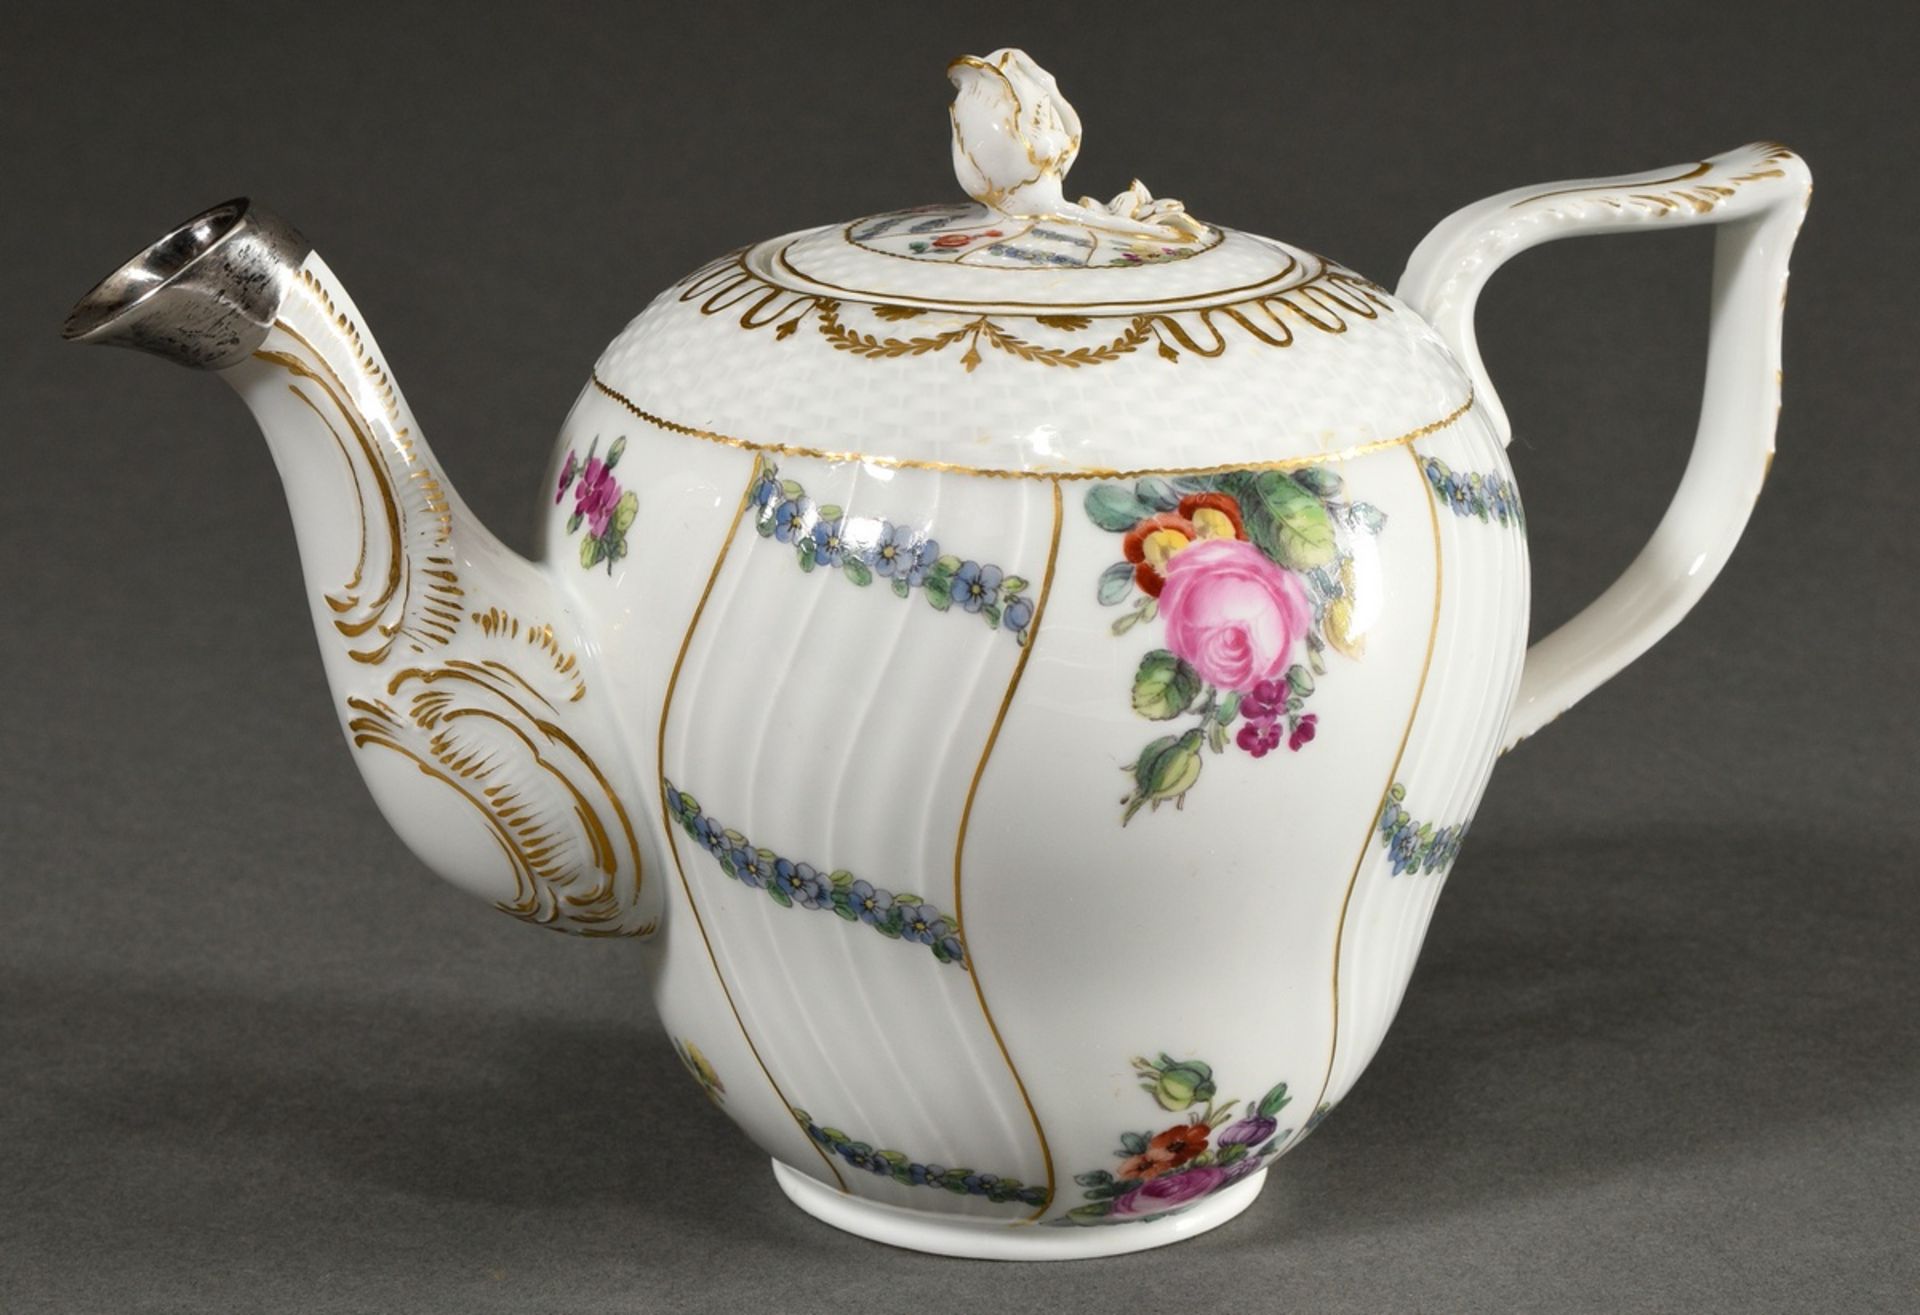 Royal Copenhagen teapot in new ozier relief with polychrome floral festoons and bouquets, gold deco